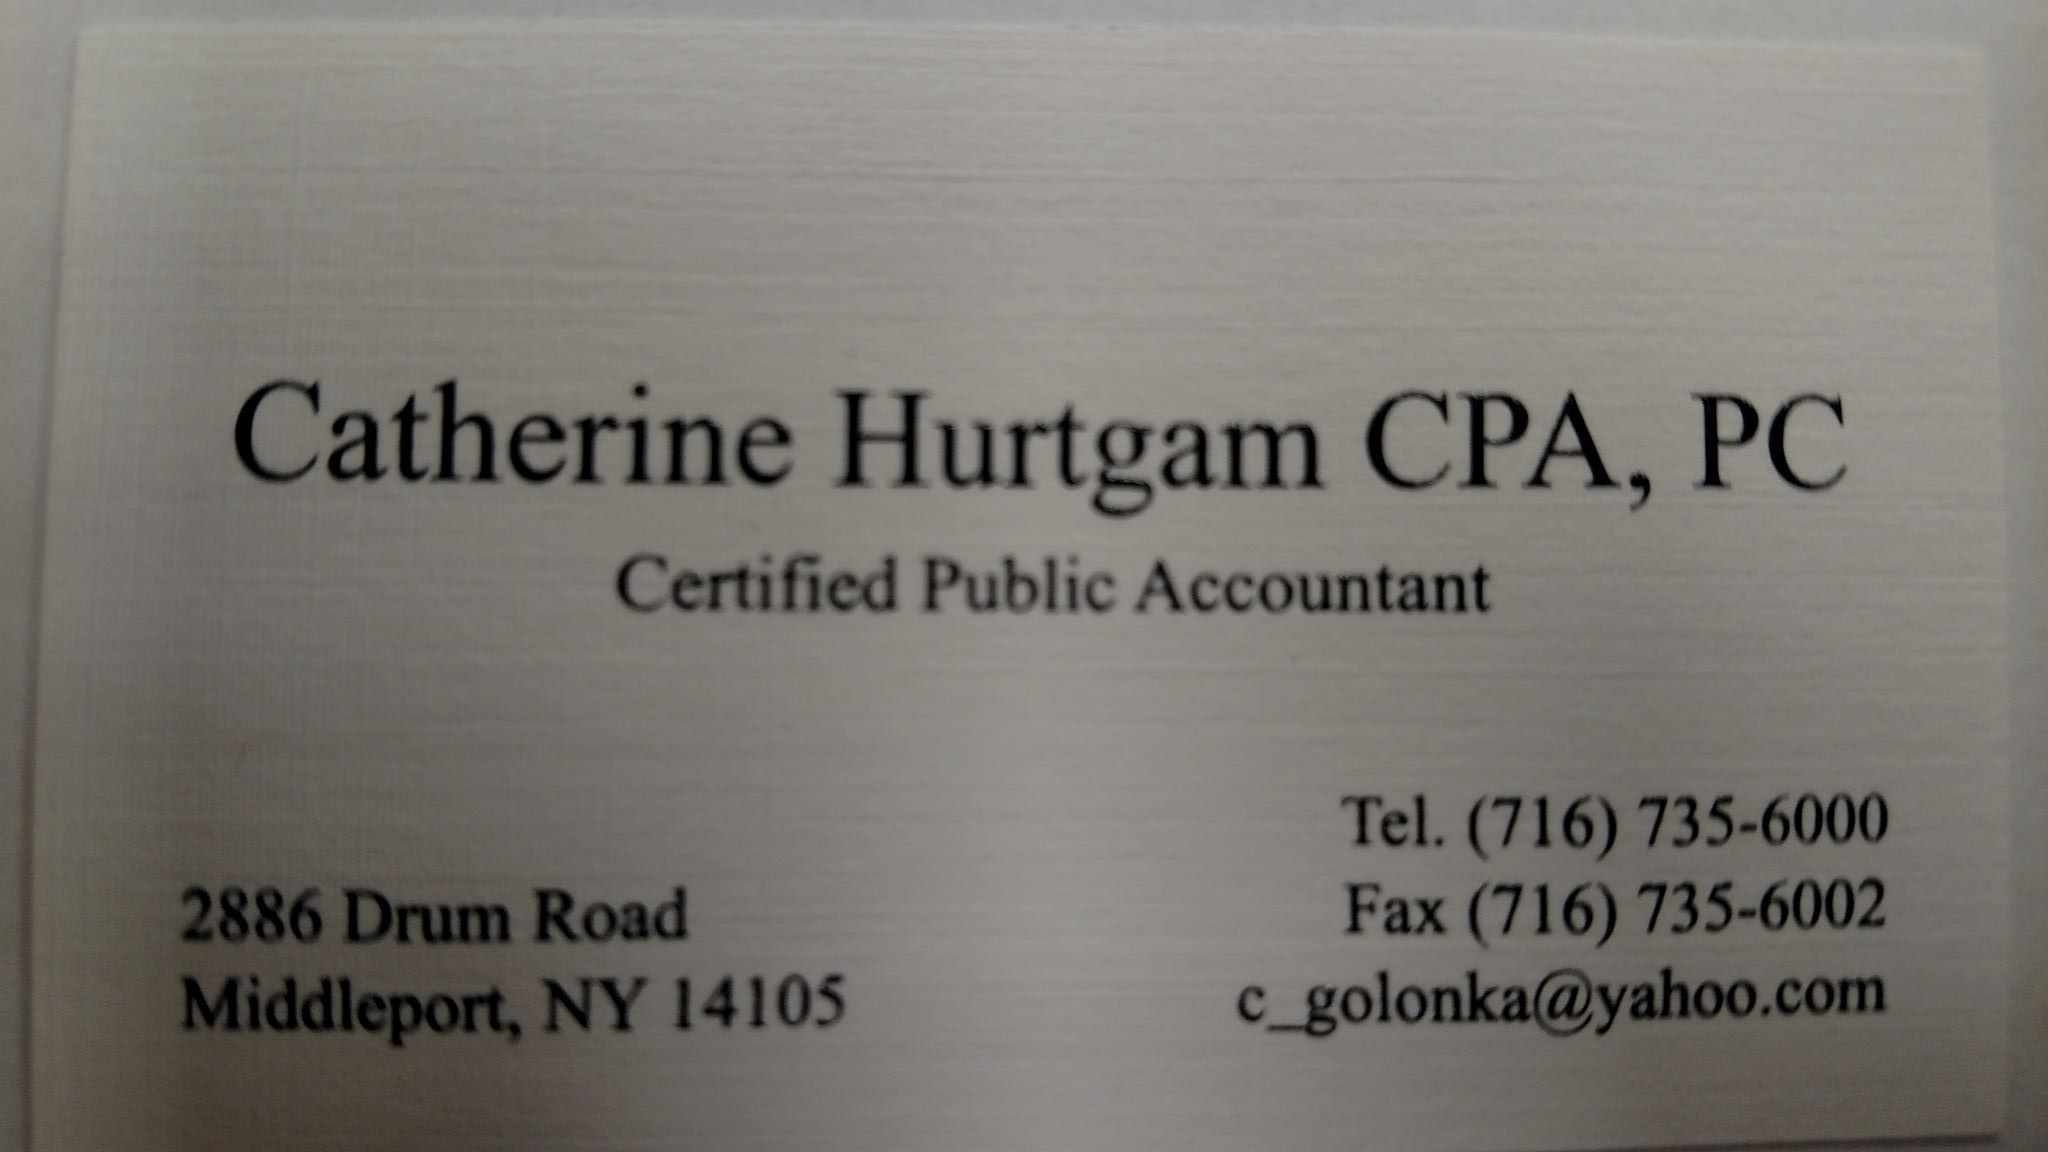 Catherine Hurtgam CPA 2886 Drum Rd, Middleport New York 14105